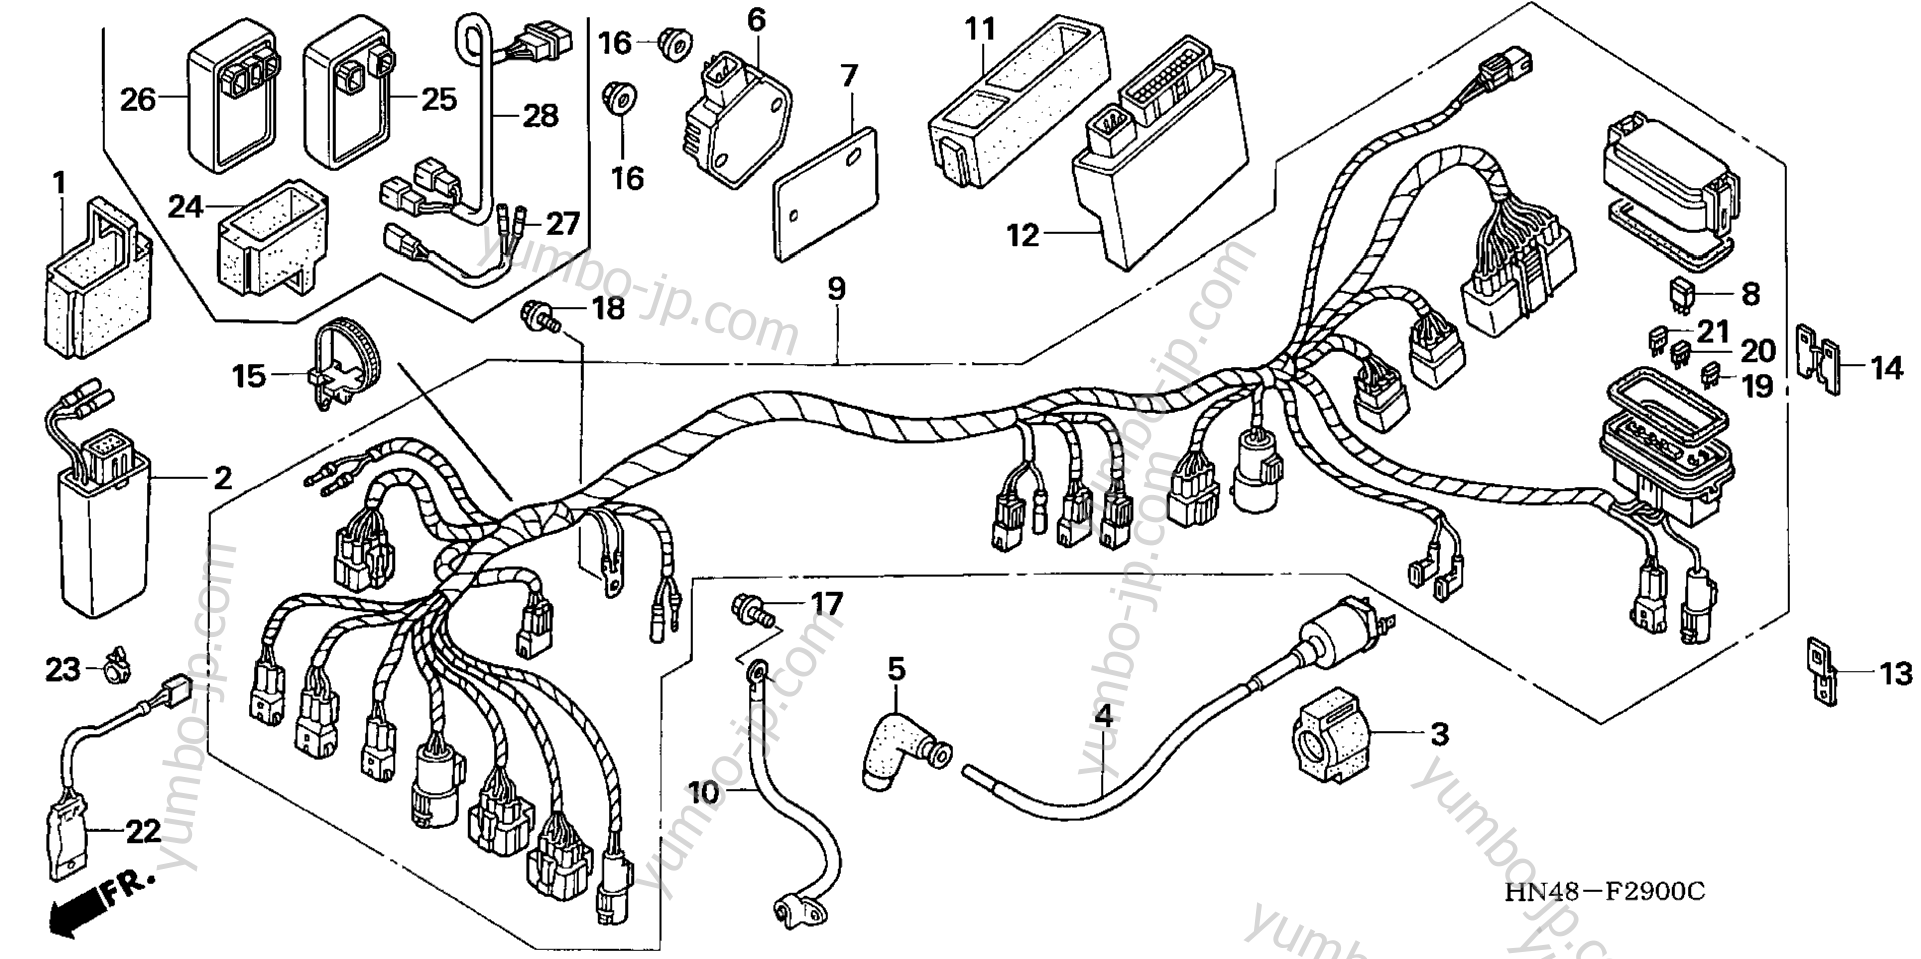 WIRE HARNESS for ATVs HONDA TRX350FE 2A 2004 year